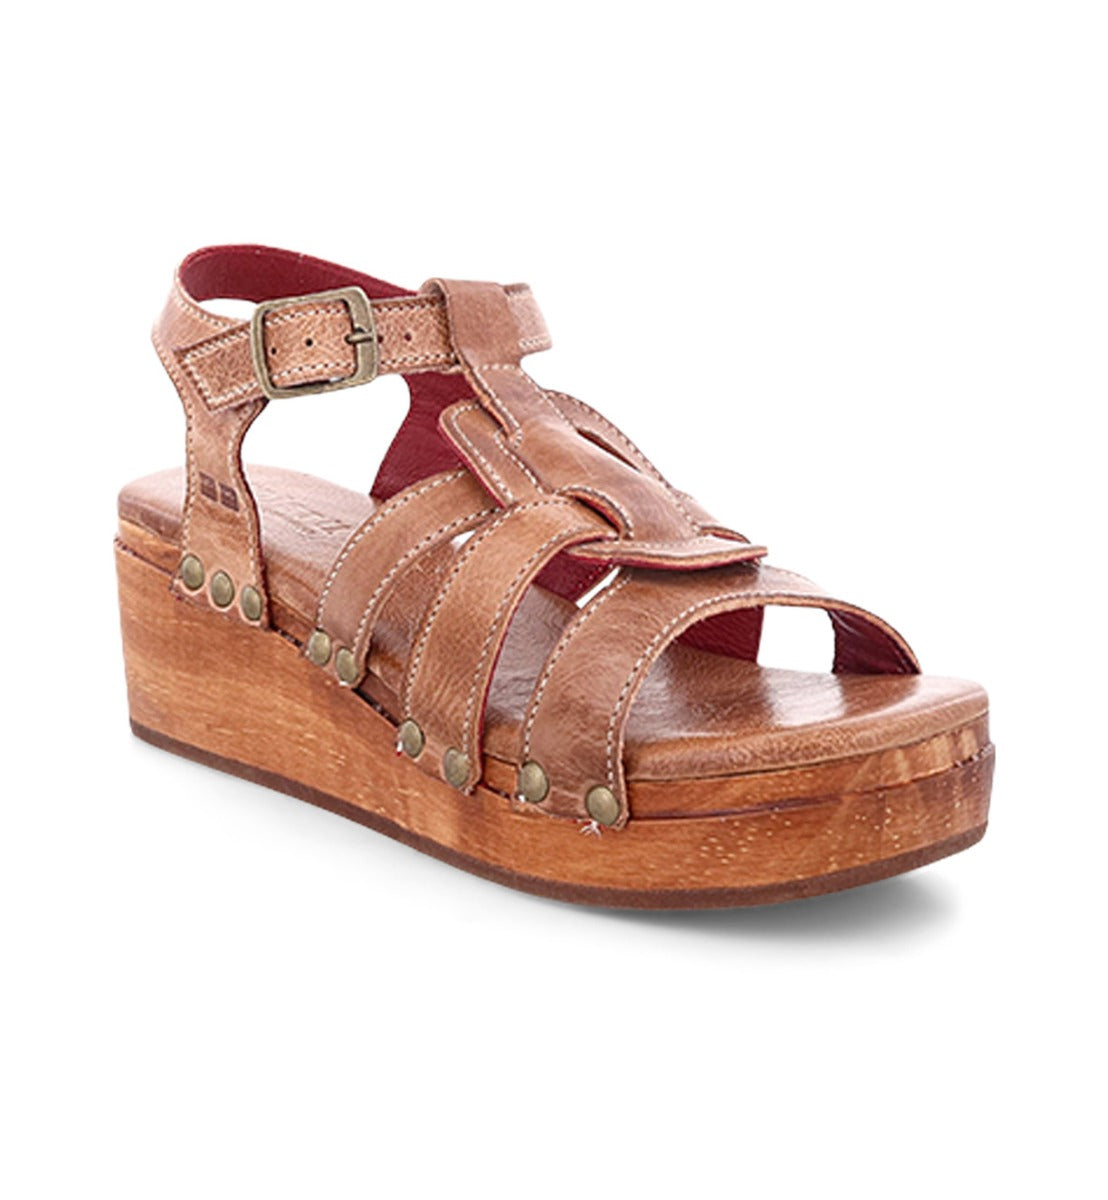 A women's sandal with a wooden platform and straps called Fabiola by Bed Stu.